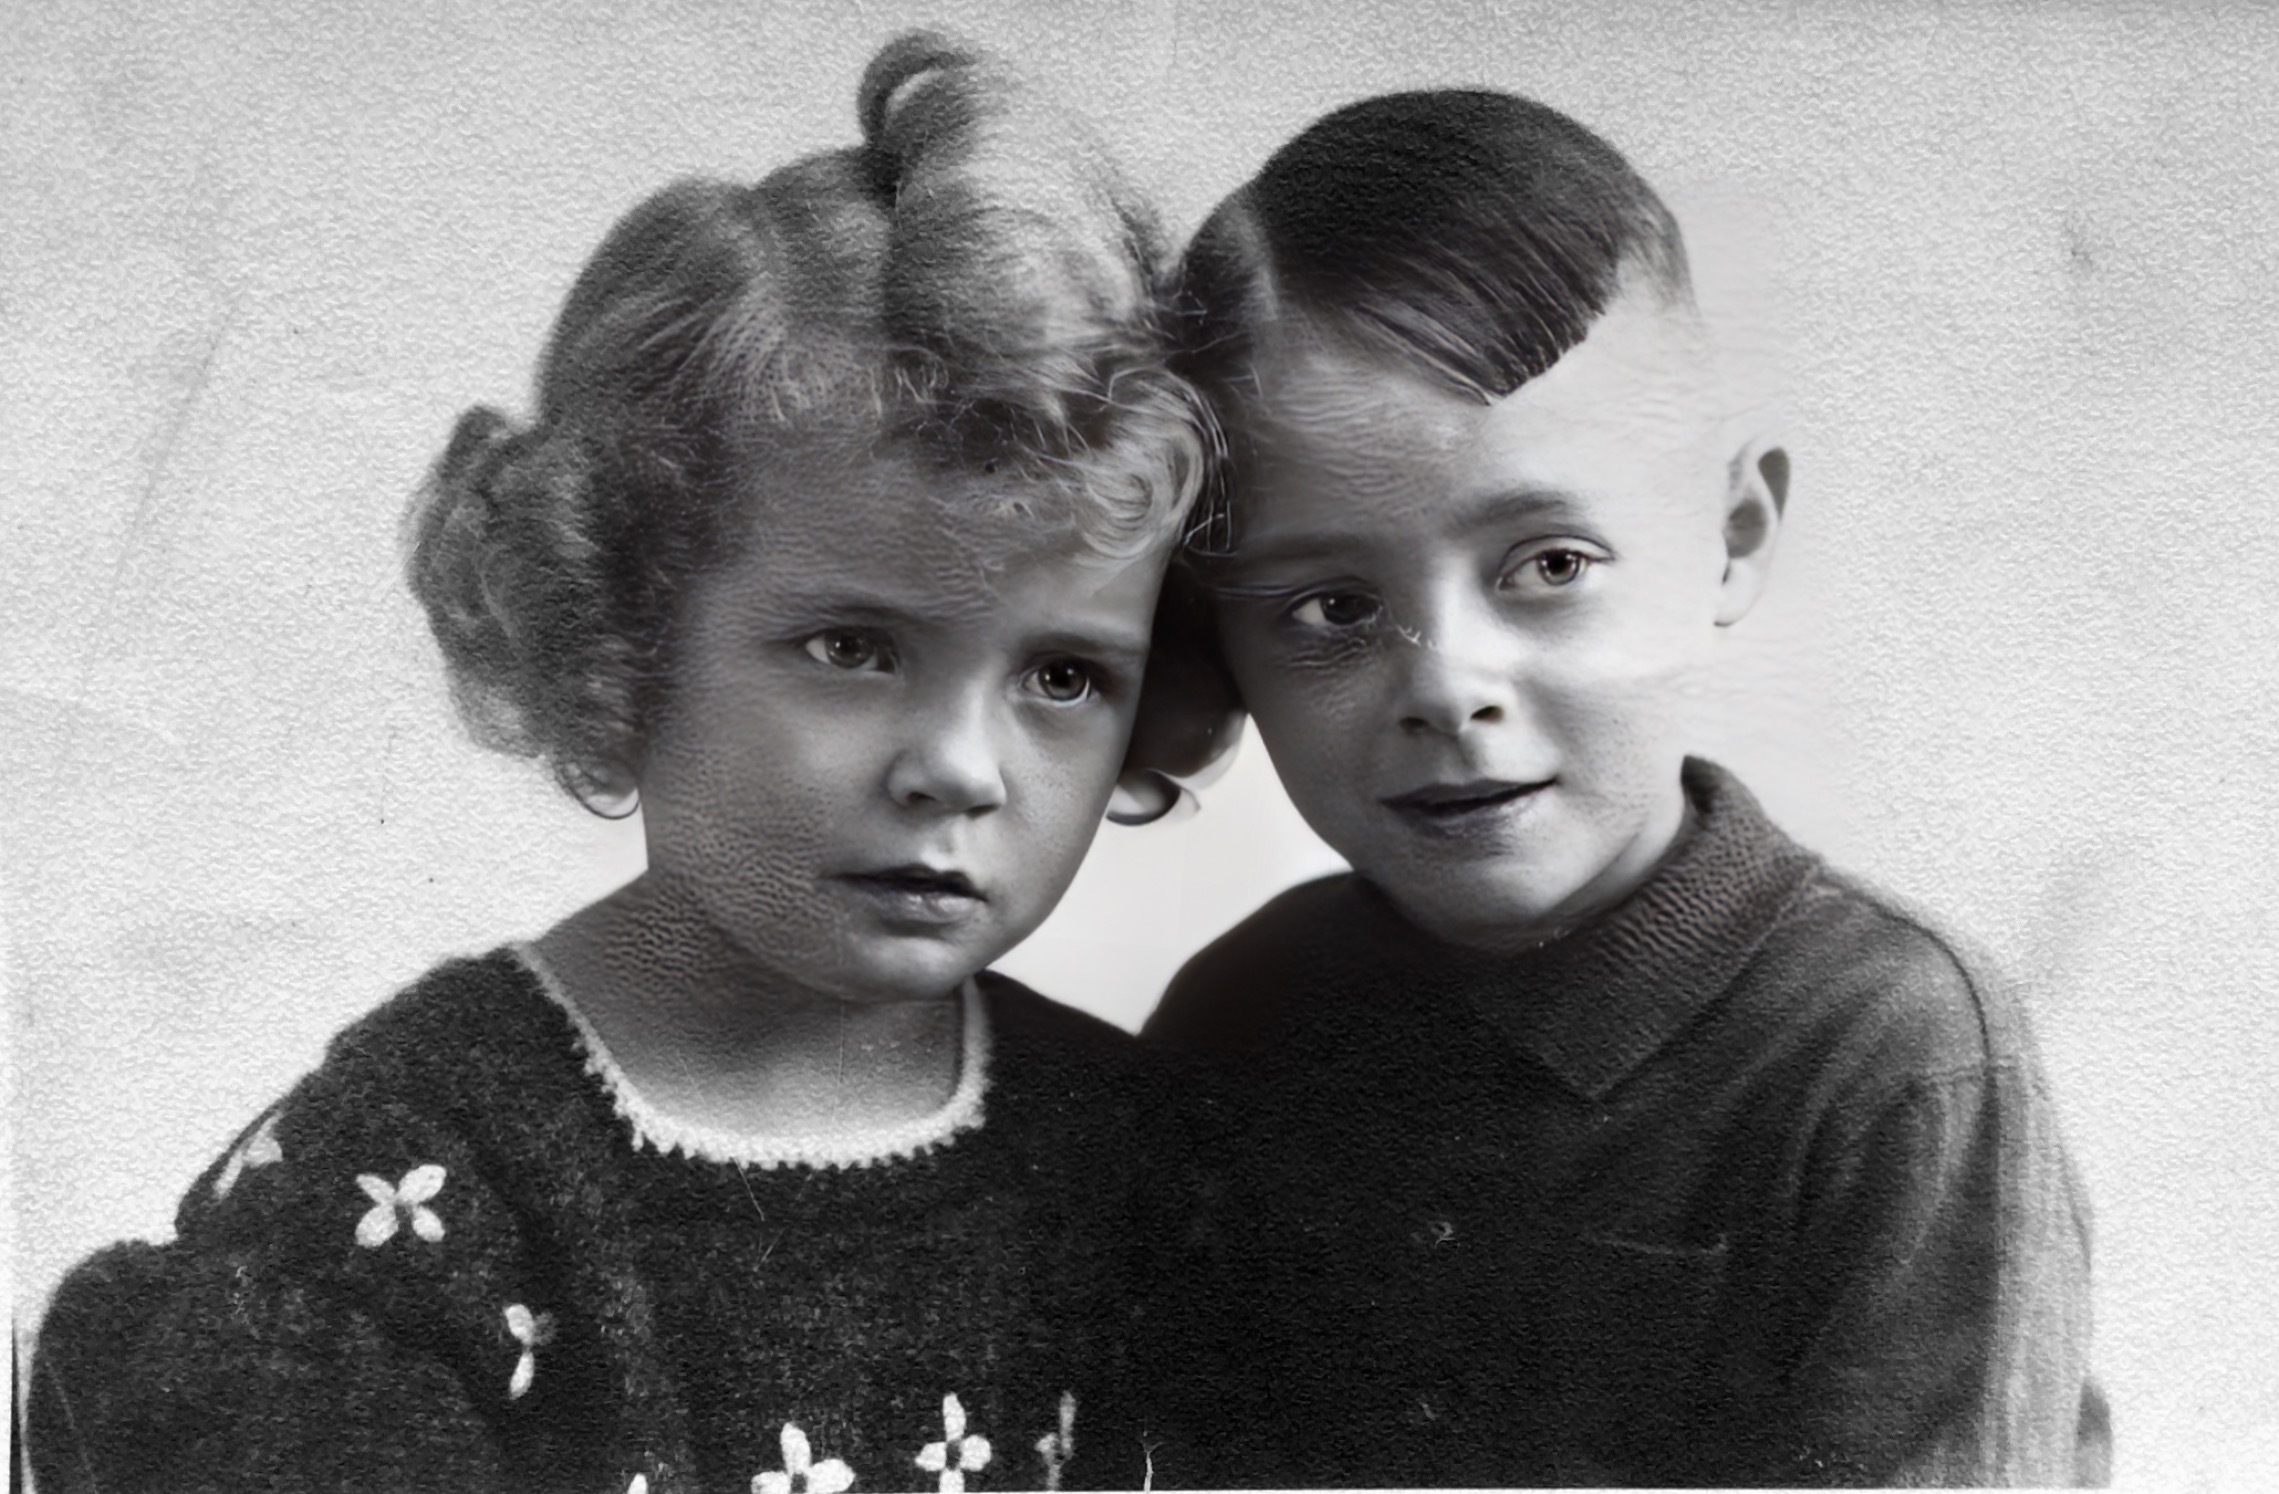 Christmas 1942- My older brother and I....Braunschweig, Germany 